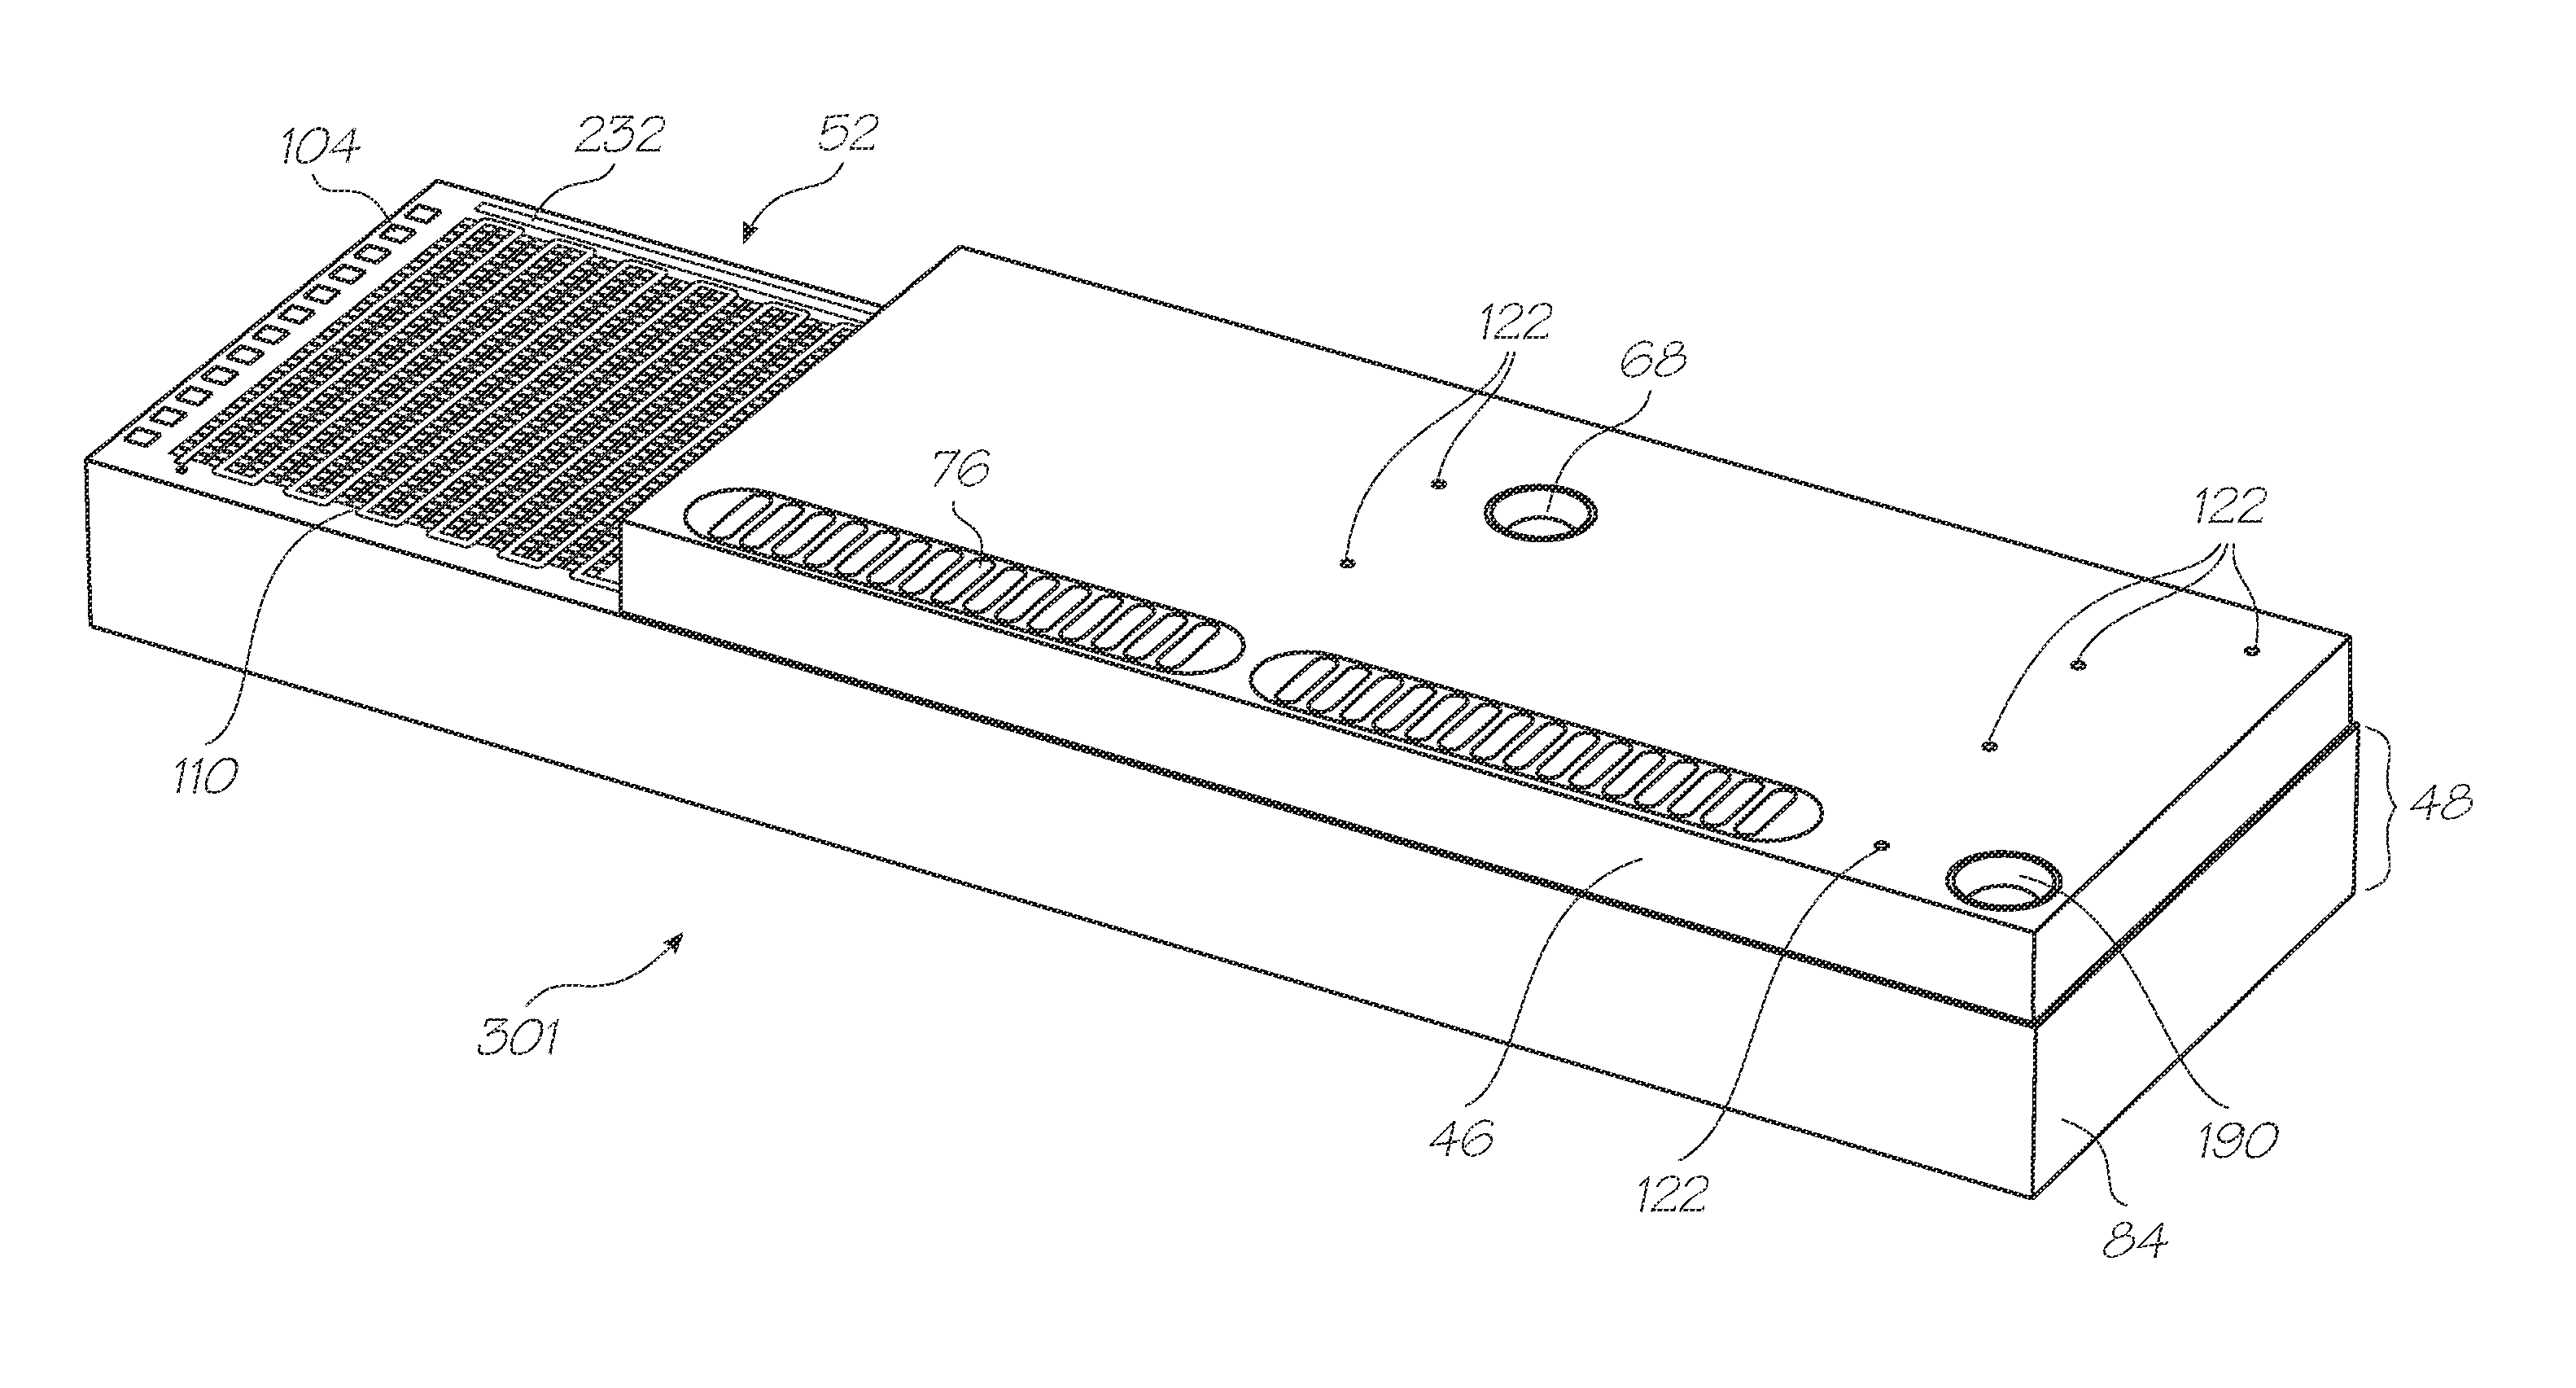 Microfluidic device with PCR chamber between supporting substrate and heater